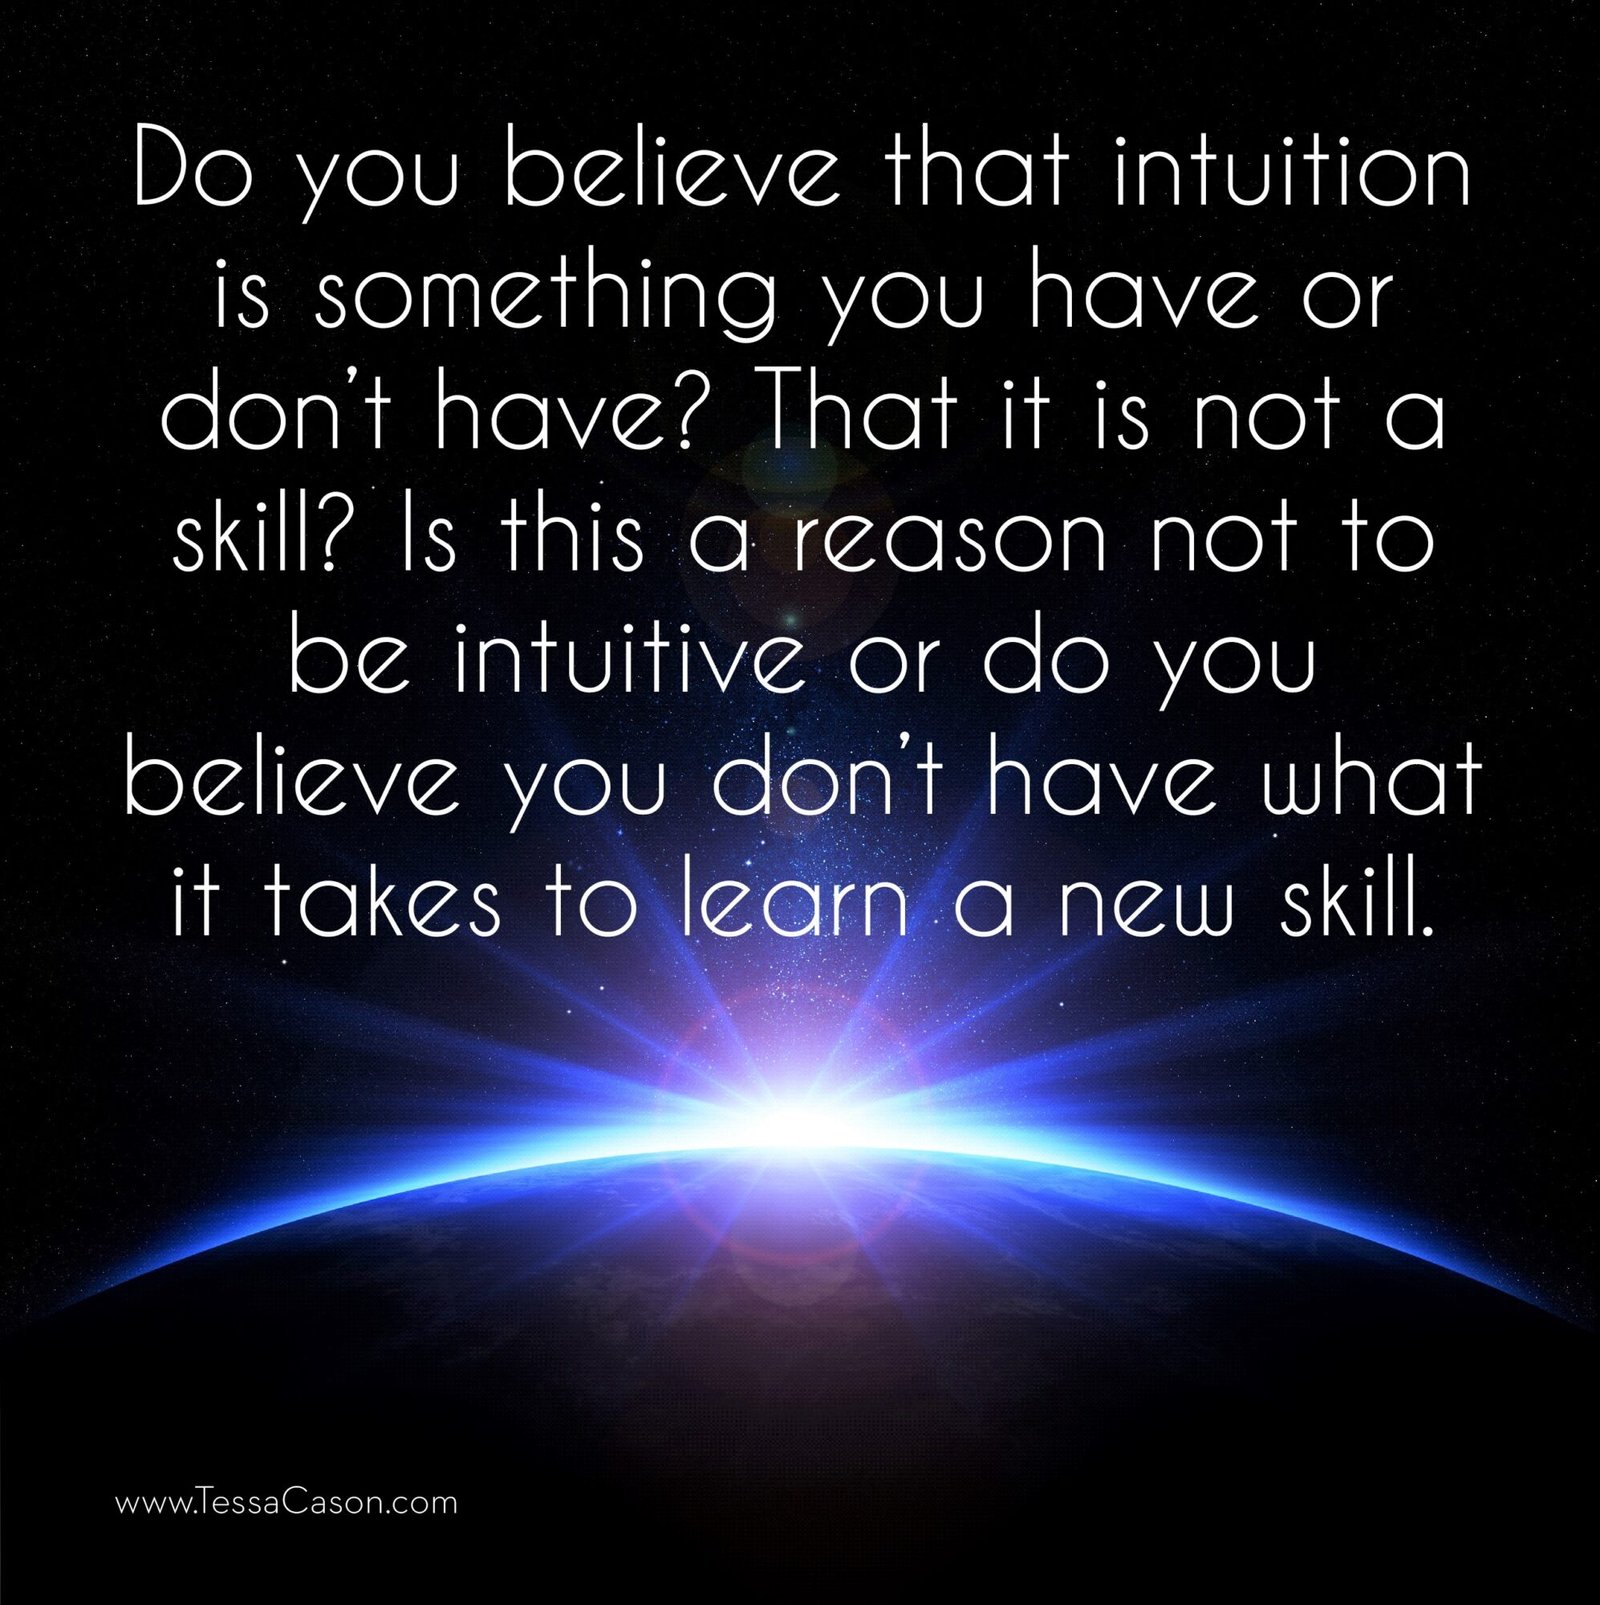 Do you believe that intuition is something you have or don't have